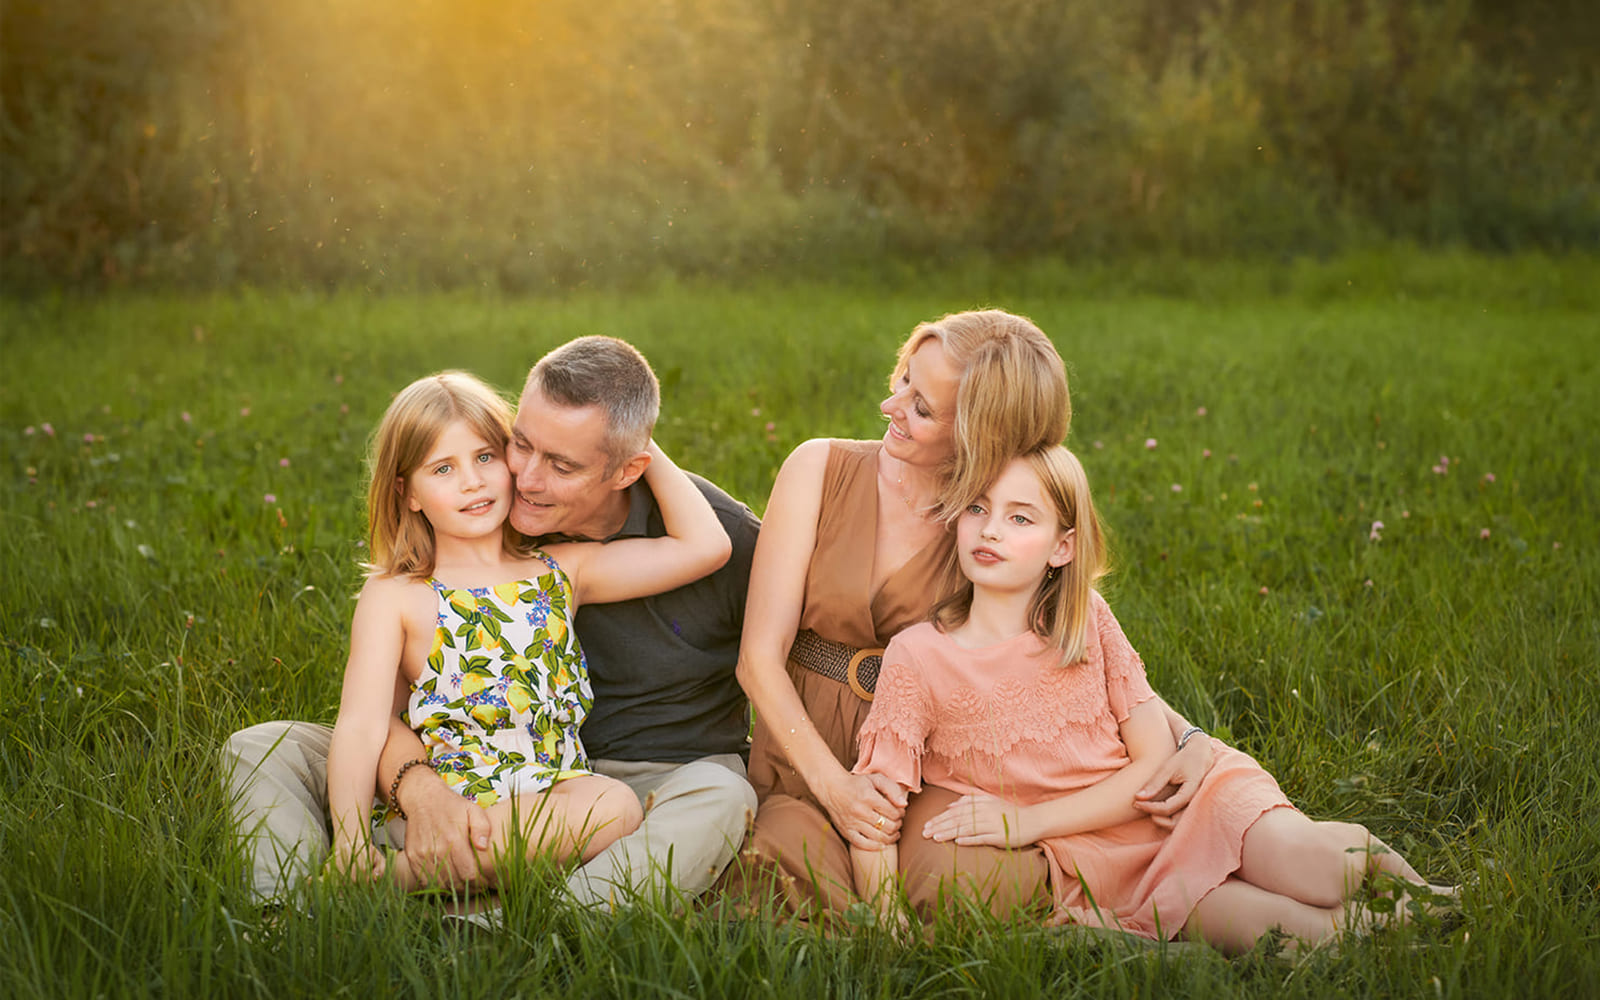 Family outdoor photoshooting at sunset time. Family with kids photos, Luzern.